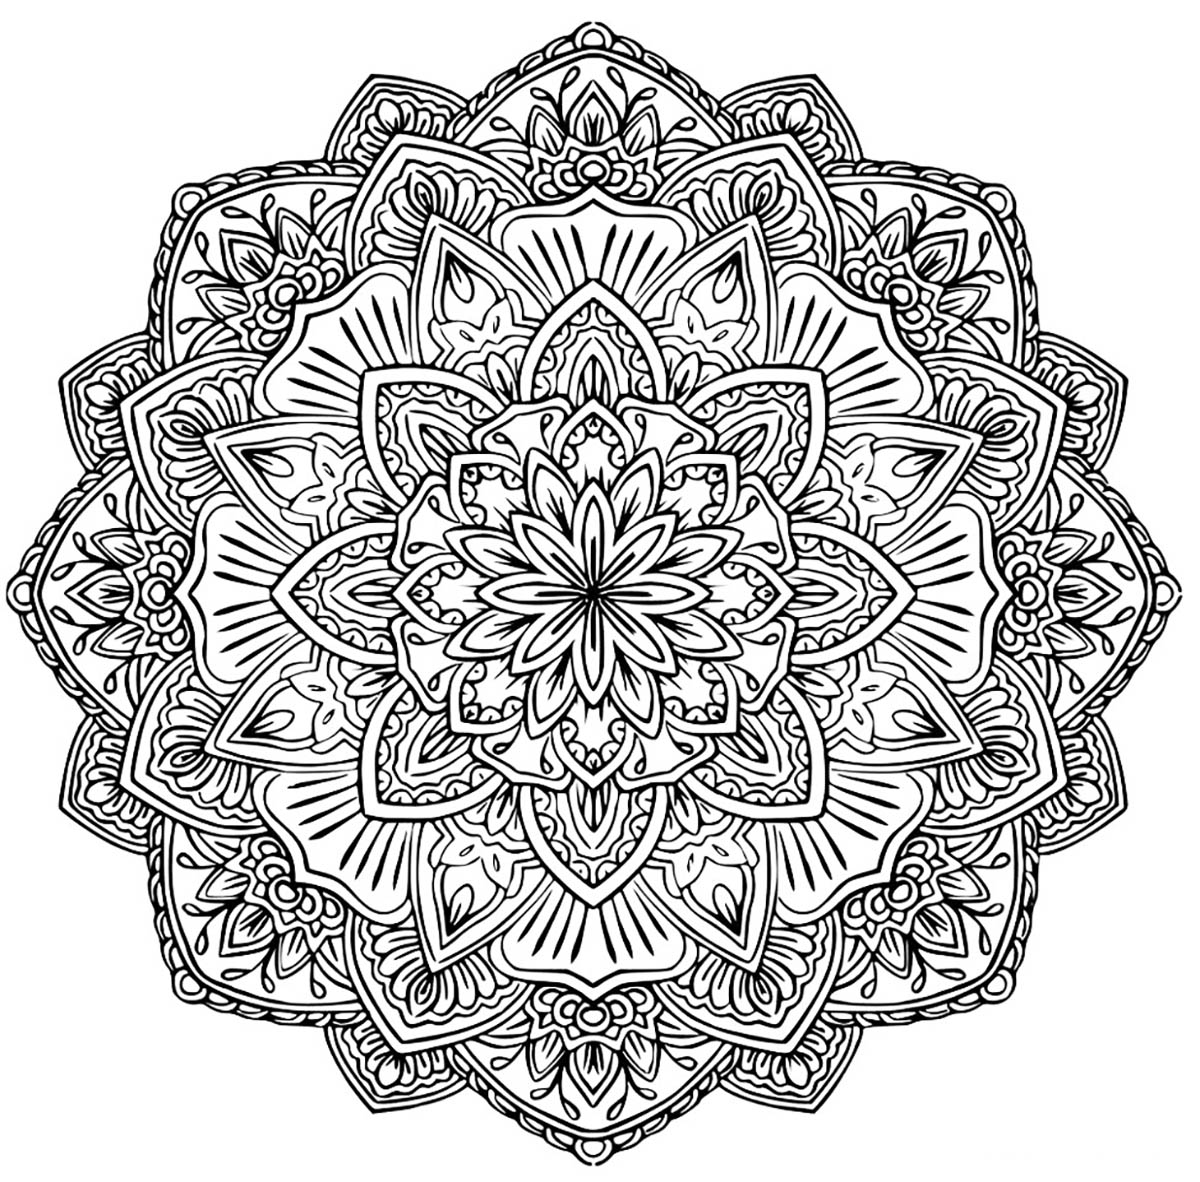 Download Mandala to download in pdf 1 - M&alas Adult Coloring Pages